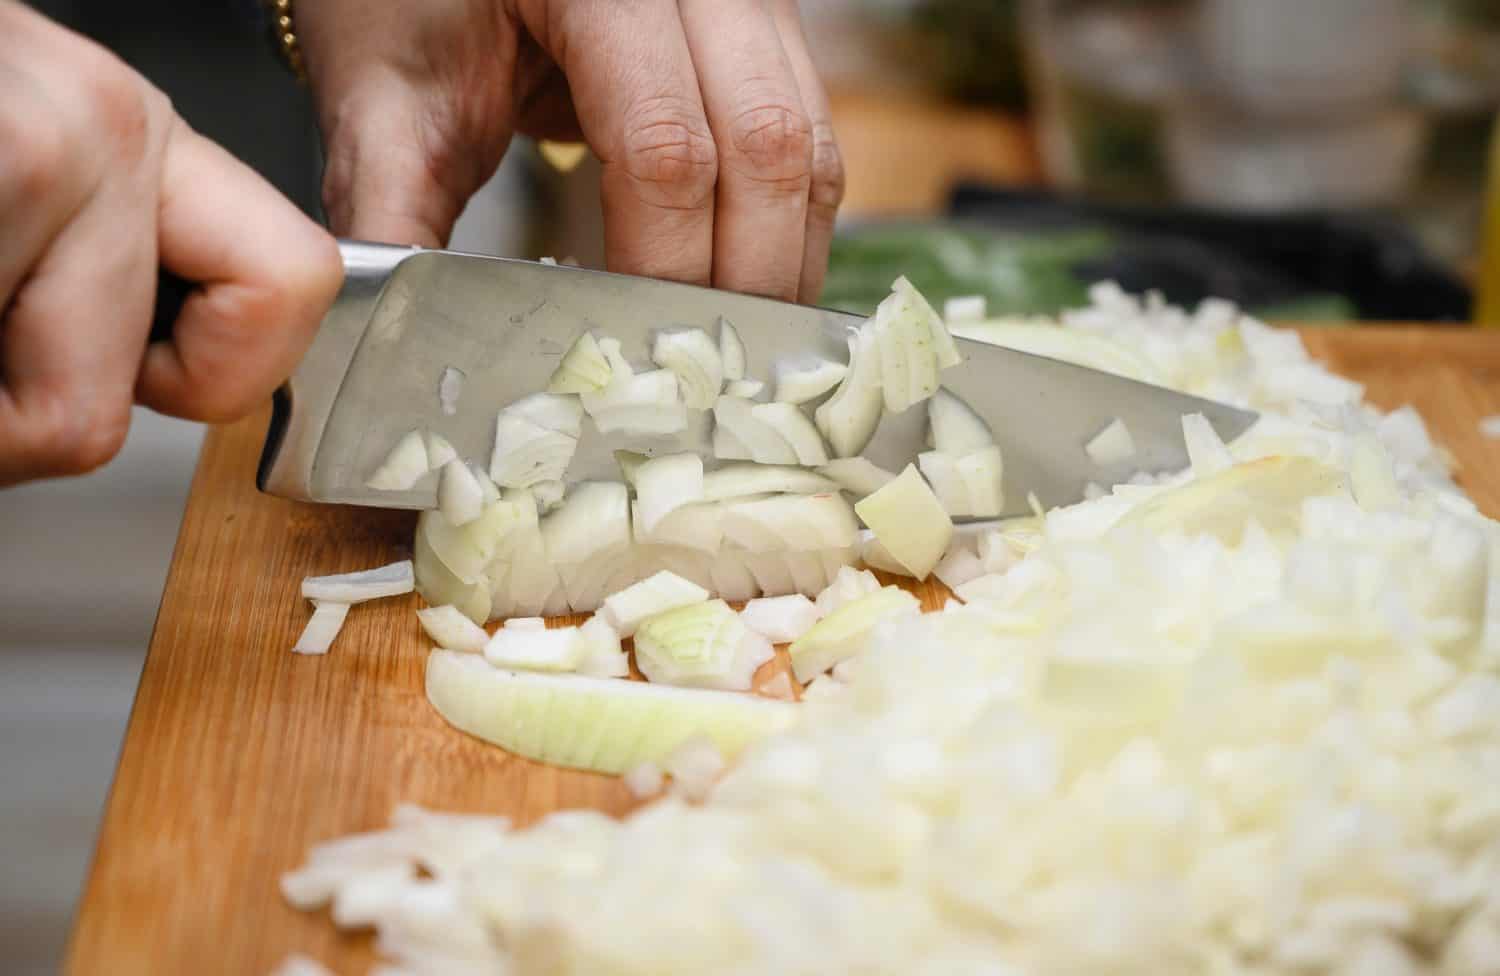 A woman holds a large sharp knife in her hand and cuts the onion into small pieces.